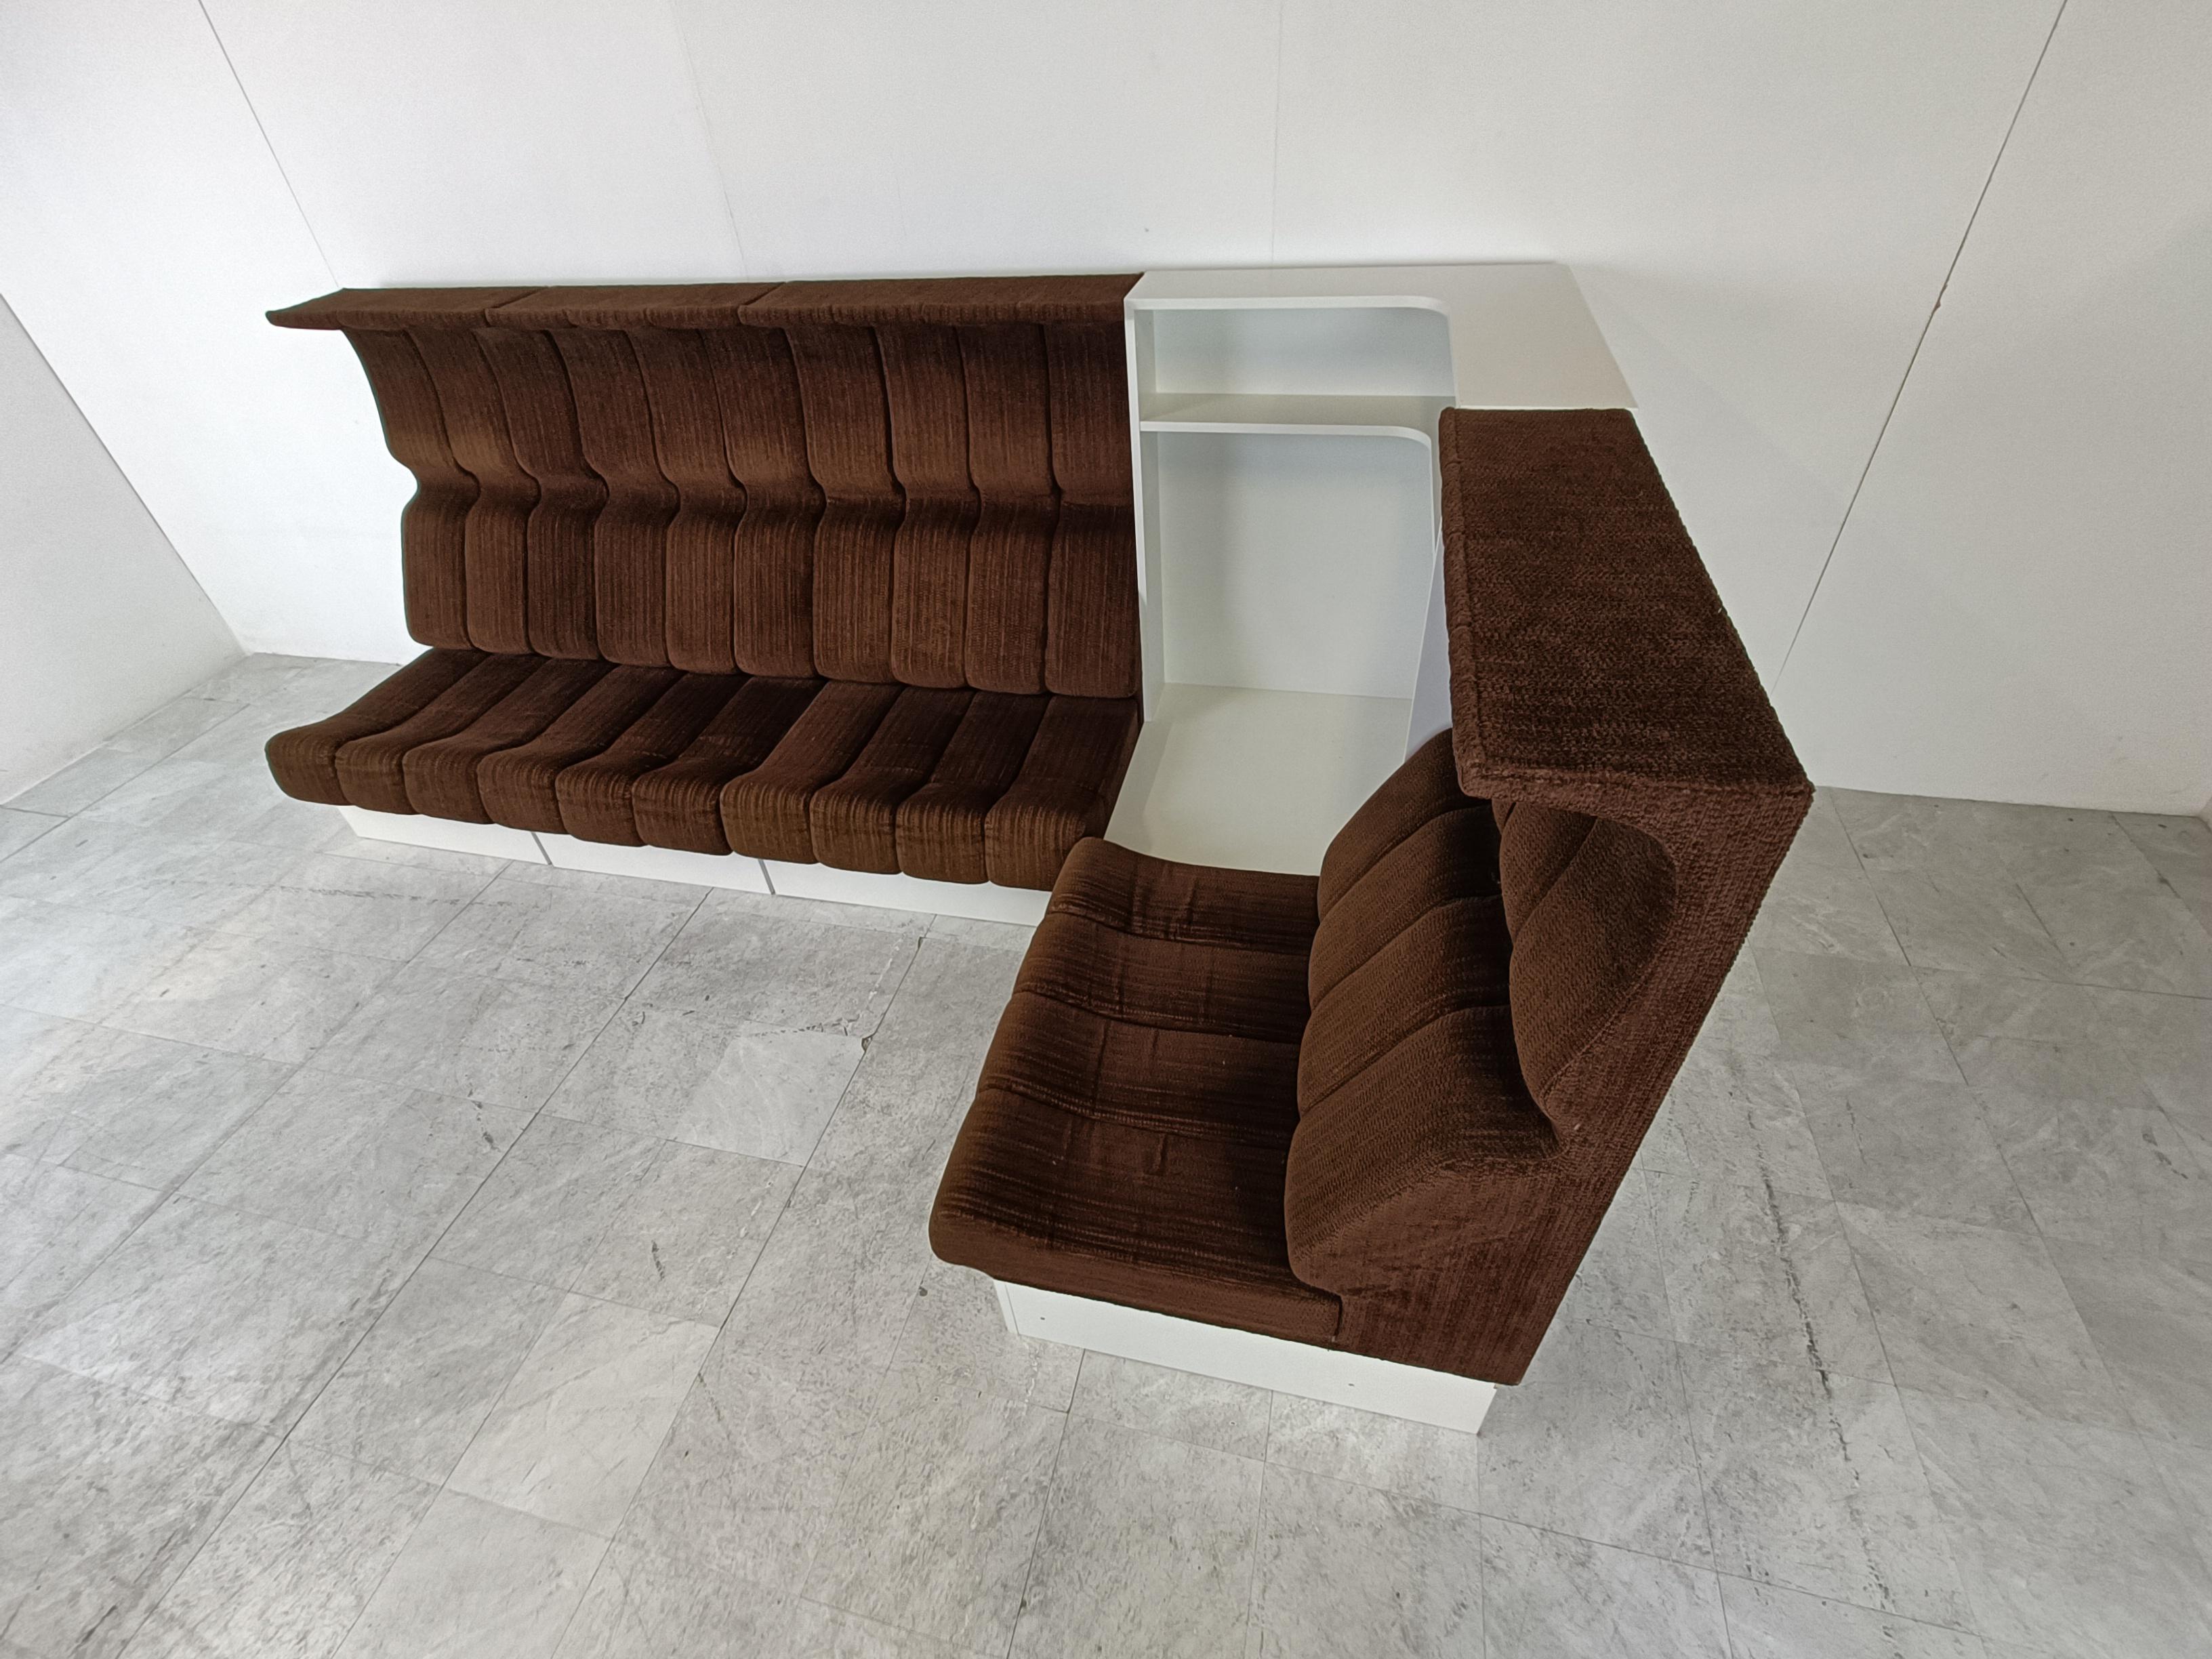 Space Age Sofa by Interlübke, 1970s For Sale 2